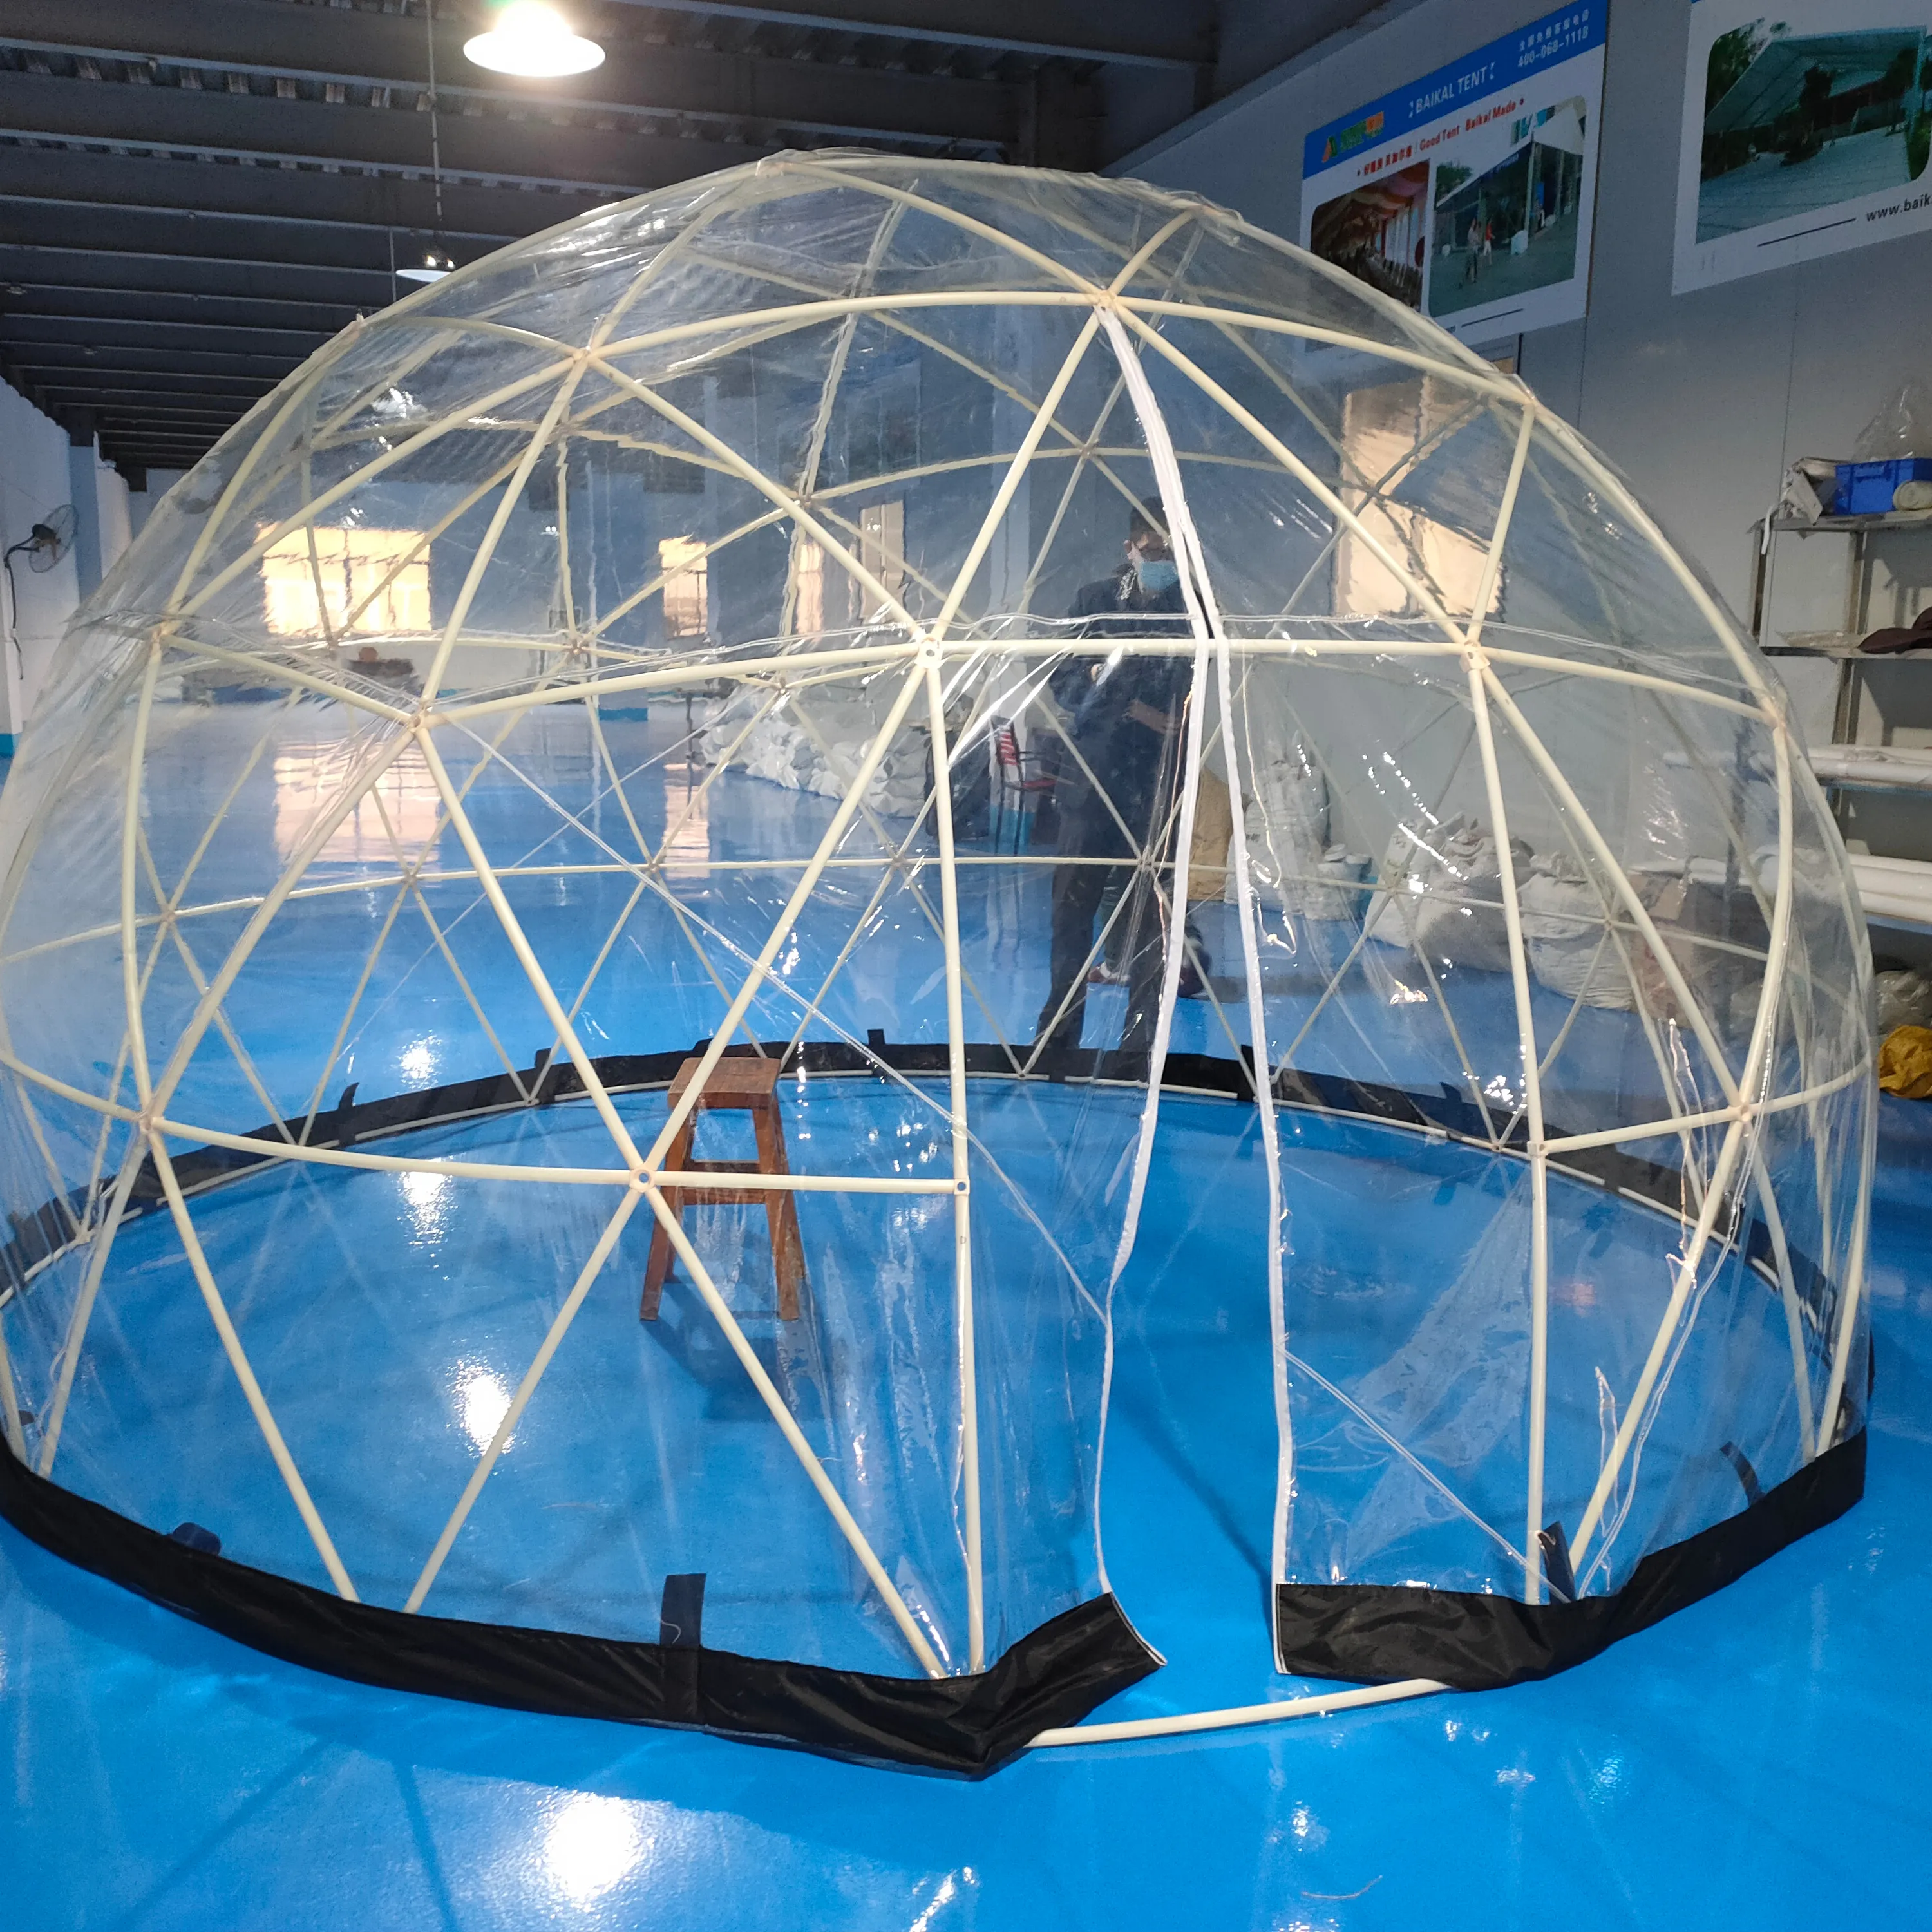 3.6M Wholeprice Luxe Outdoor Transparante Hotel Plastic Buizen Clear Dome Tuin Iglo Tent Voor Outdoor Party